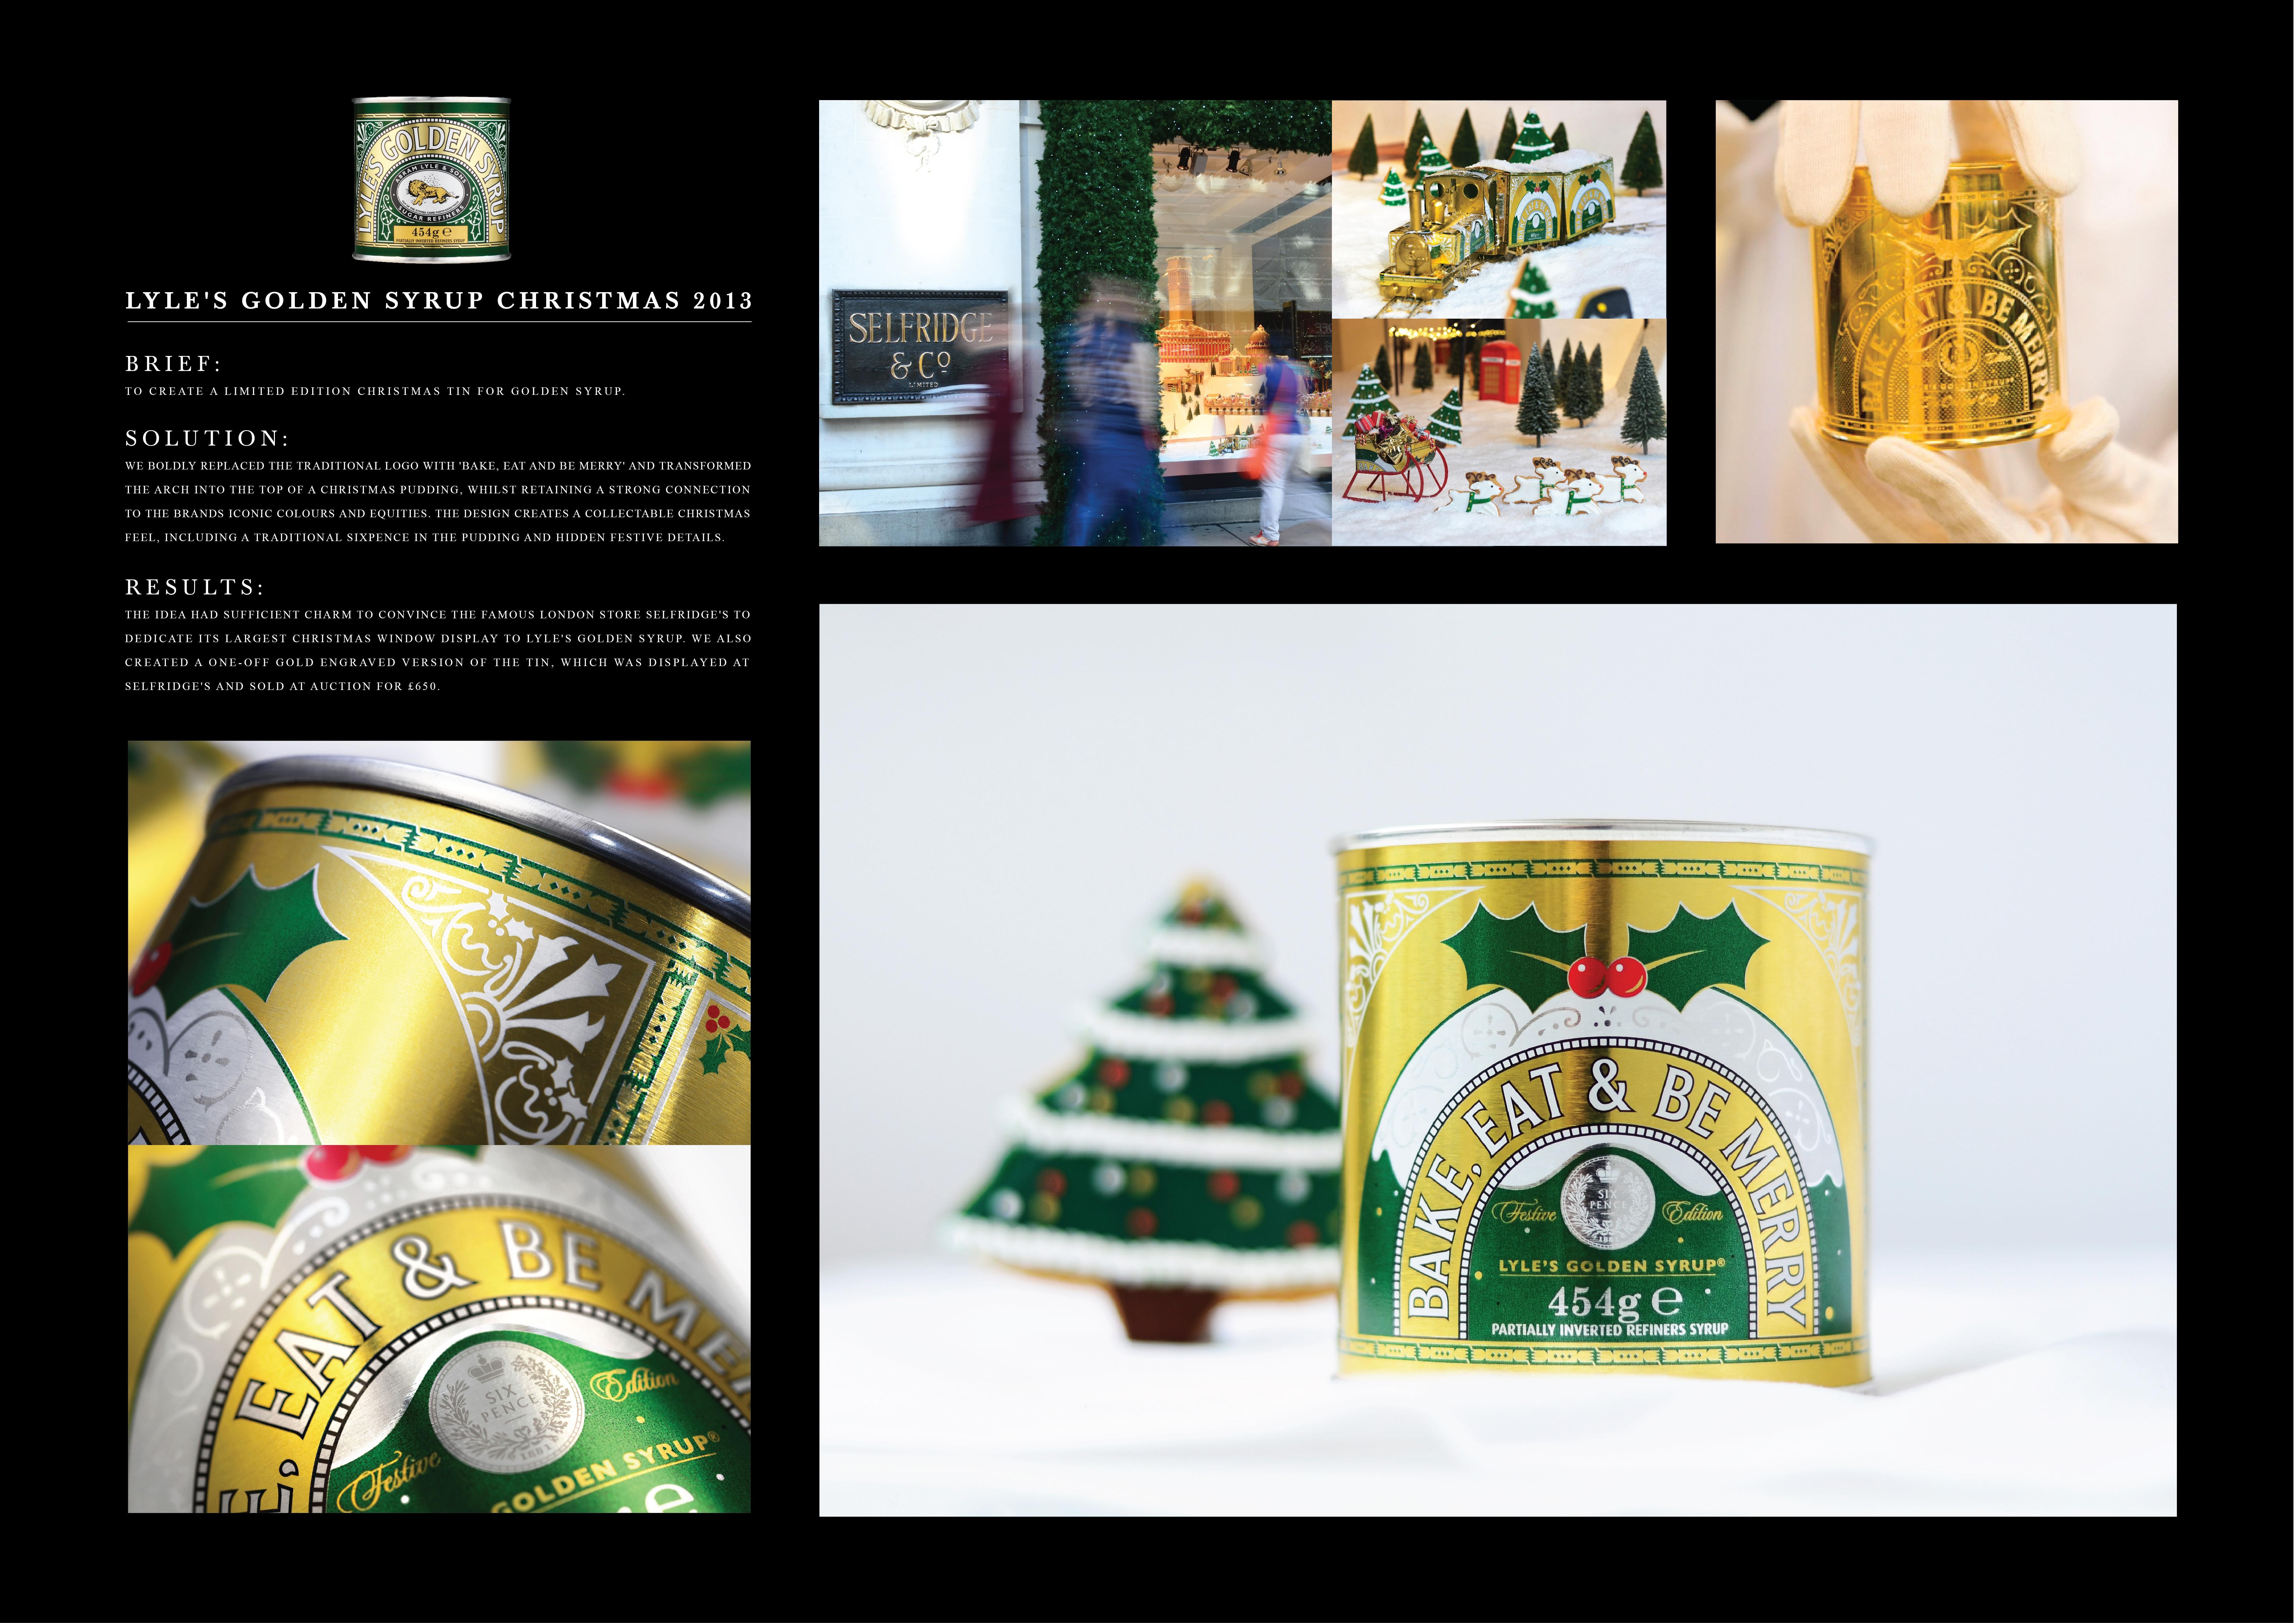 LYLE'S GOLDEN SYRUP CHRISTMAS 2013